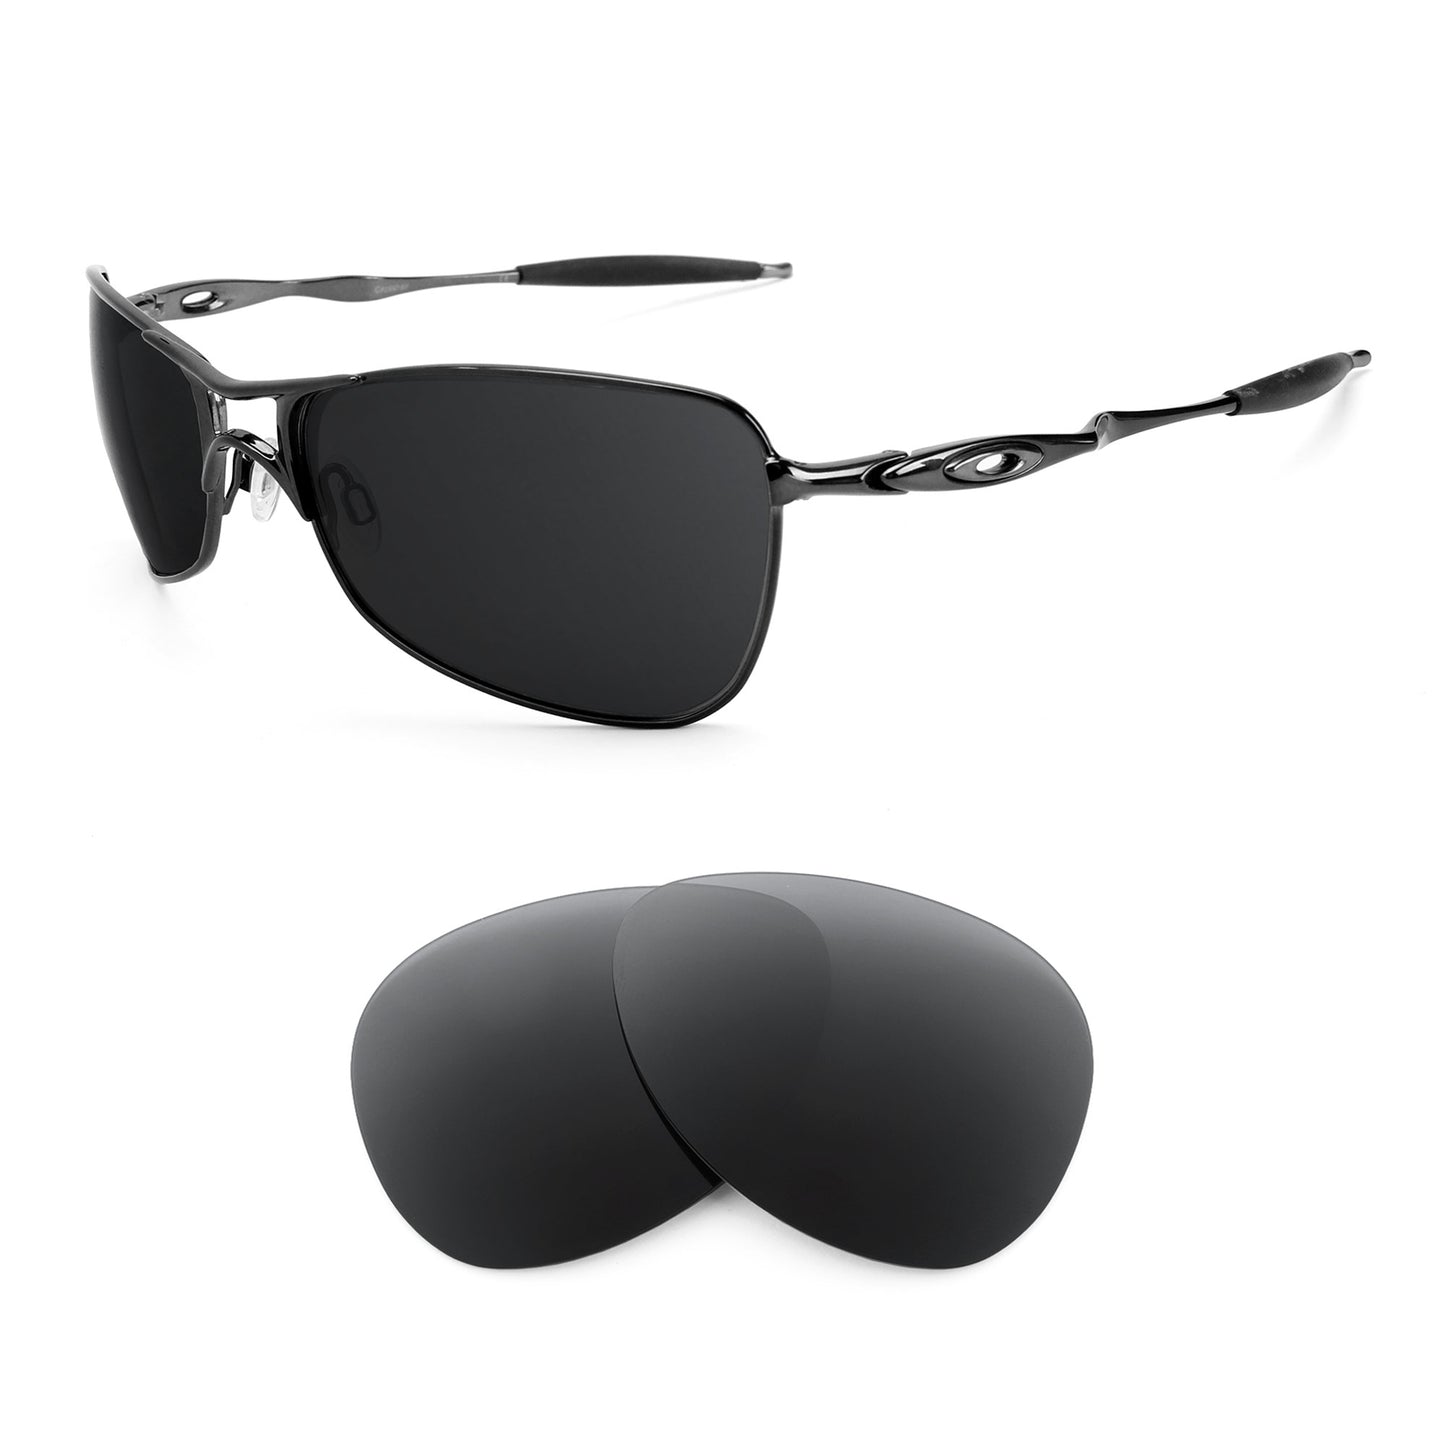 Oakley Crosshair 1.0 sunglasses with replacement lenses